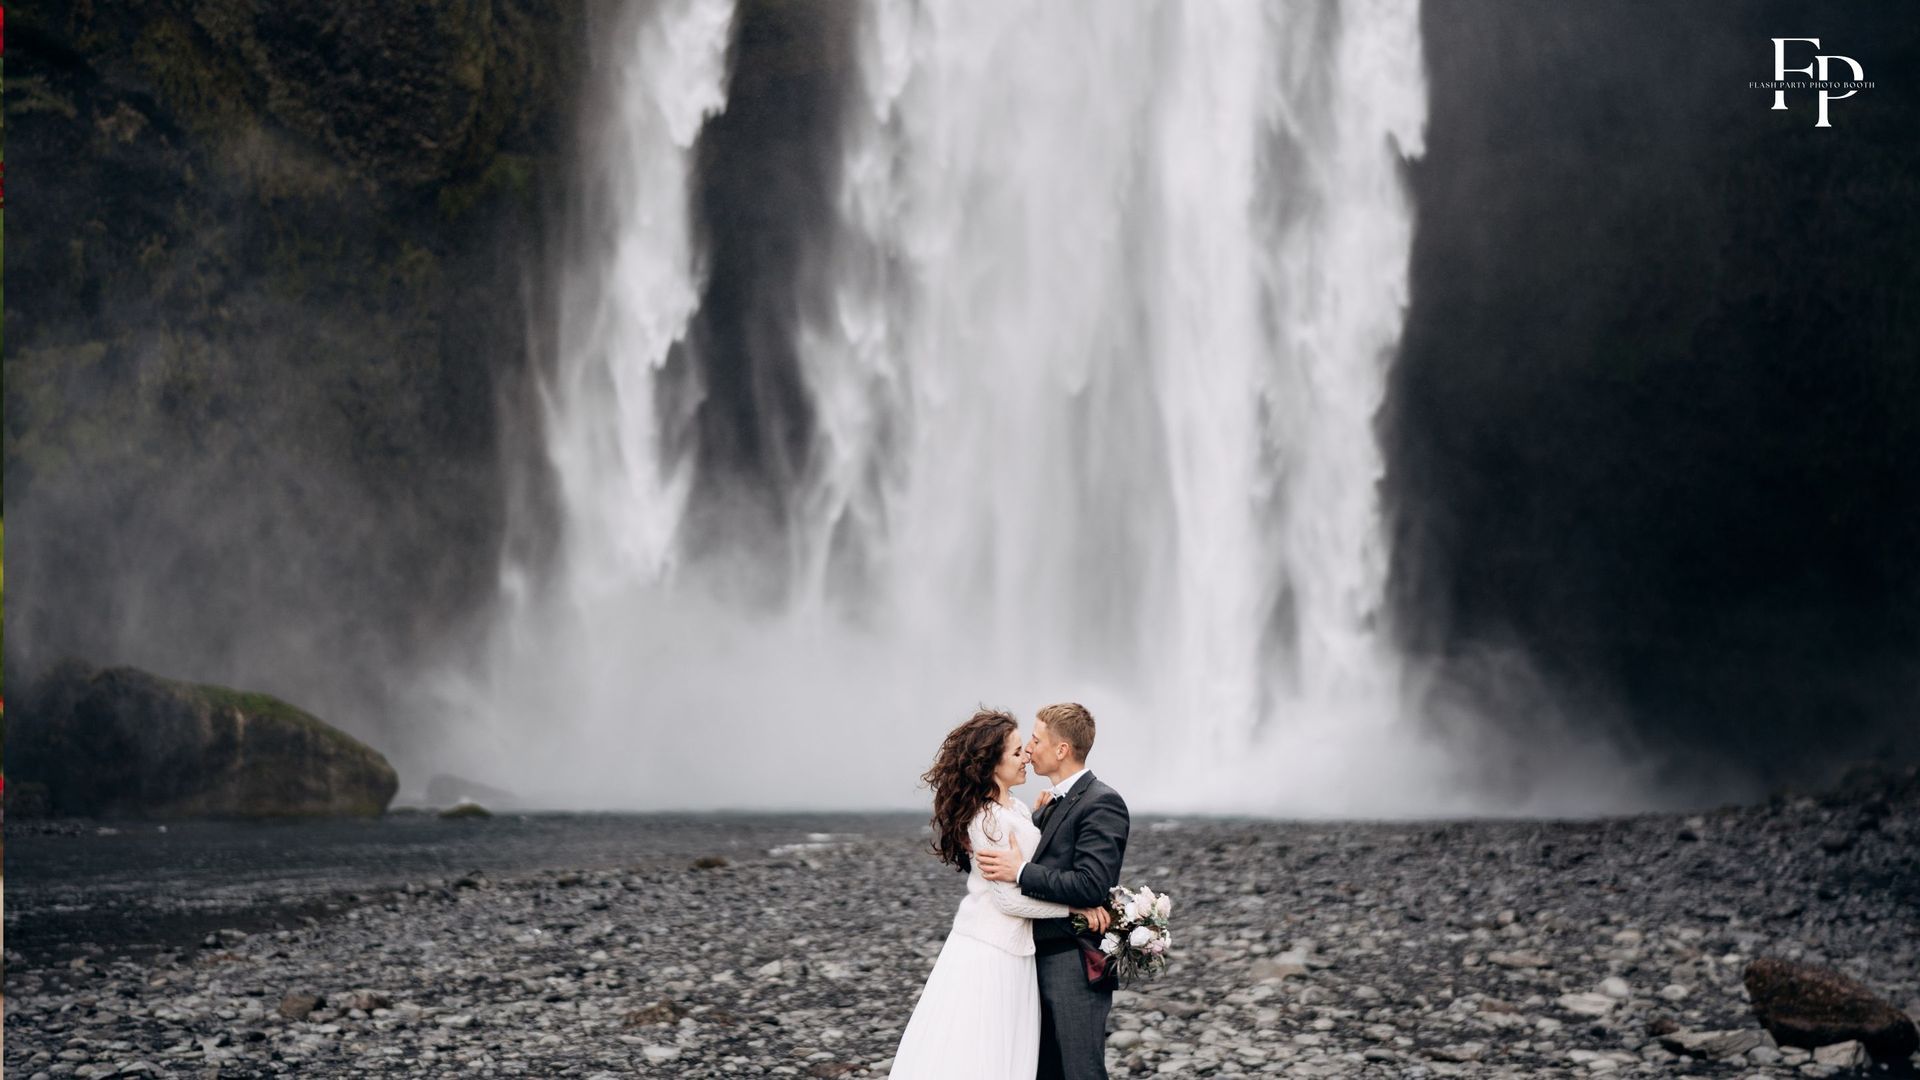 The bride and groom share a special moment with a stunning waterfall as their backdrop in a Sugar Land destination wedding.